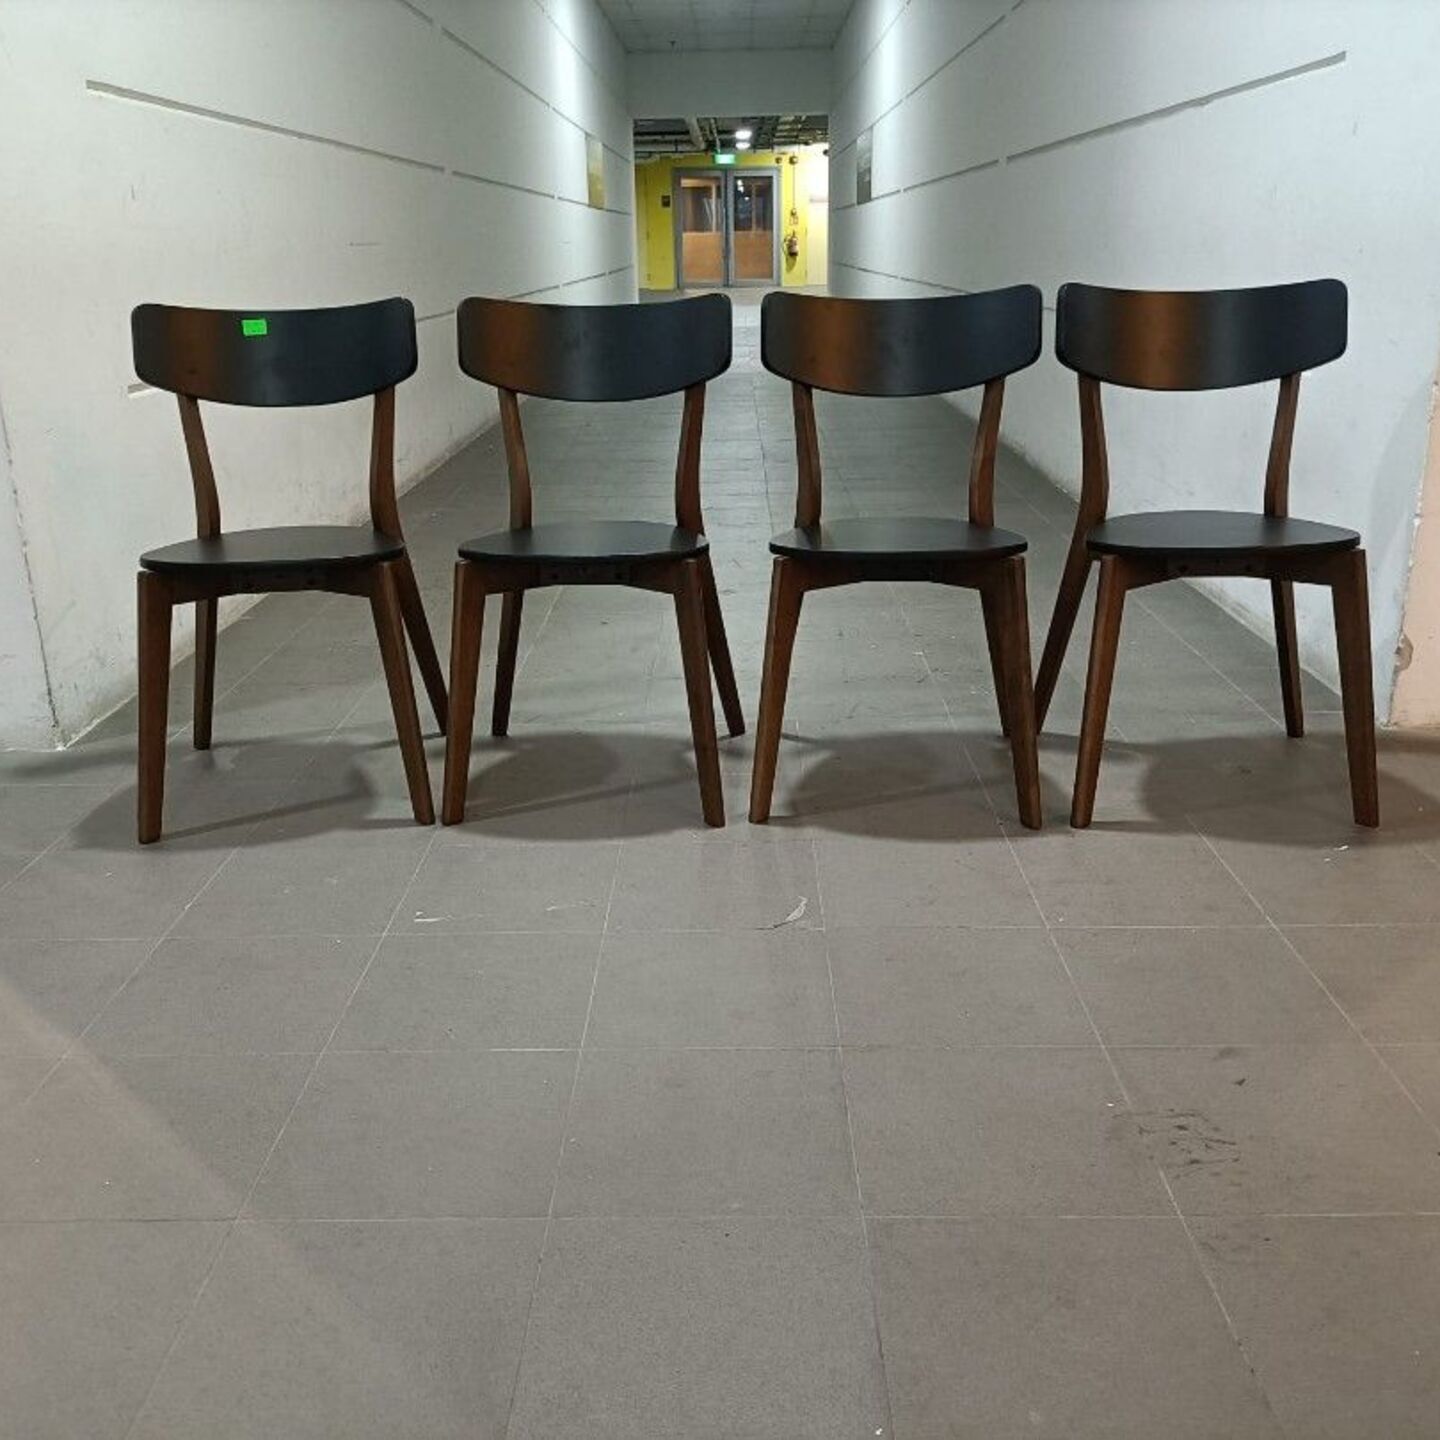 4 x JANG Dining Chairs in BLACK & WALNUT